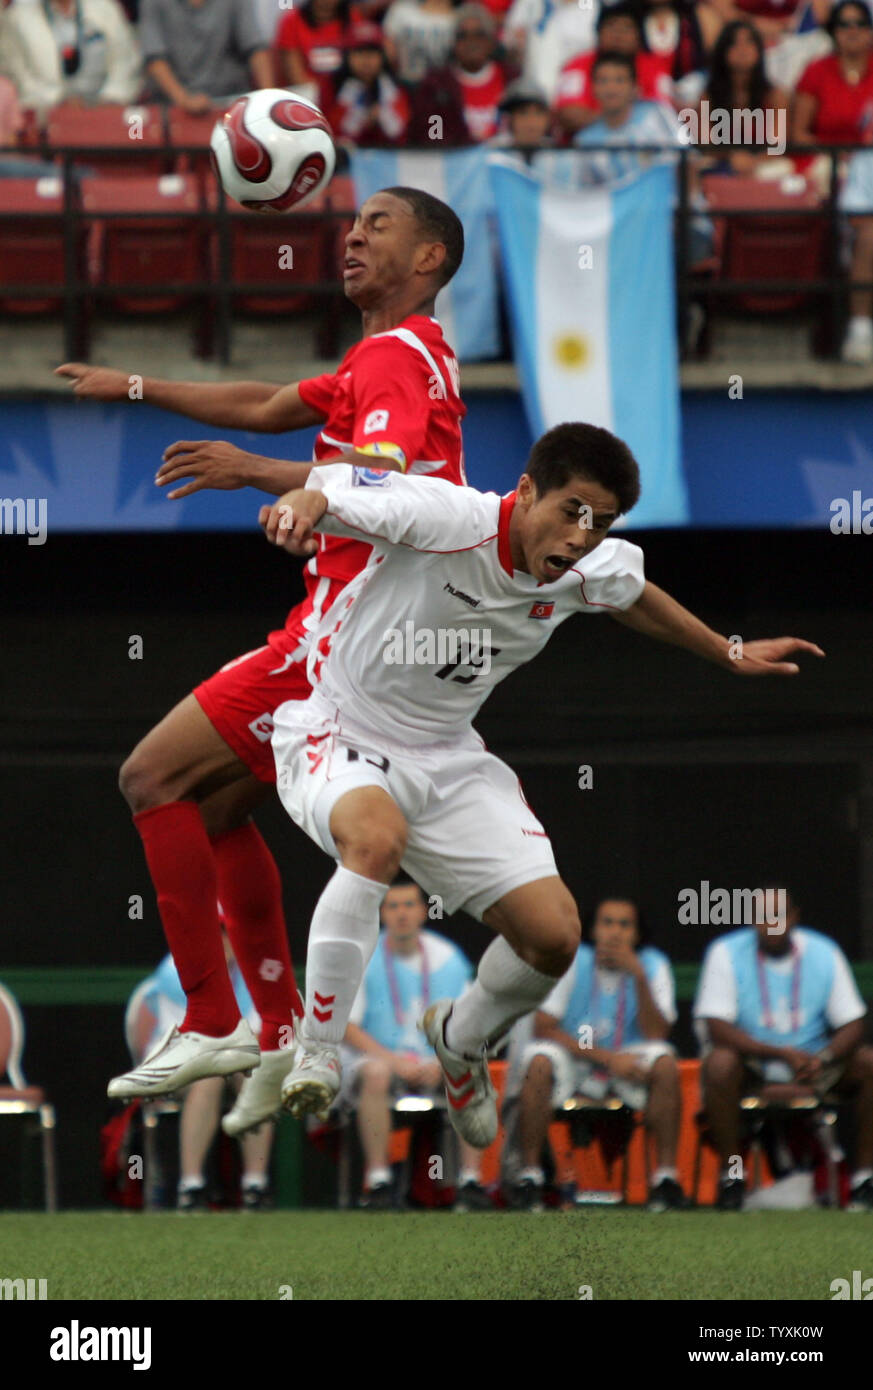 North Korean defender Yong Il Yun (15) tangles with Panama's forward Gabriel Torres during the second half of the opening FIFA Under-20 World Cup match at Frank Clair Stadium in Ottawa, Canada on June 30, 2007. The match ended in a scoreless tie. (UPI Photo/Grace Chiu). Stock Photo